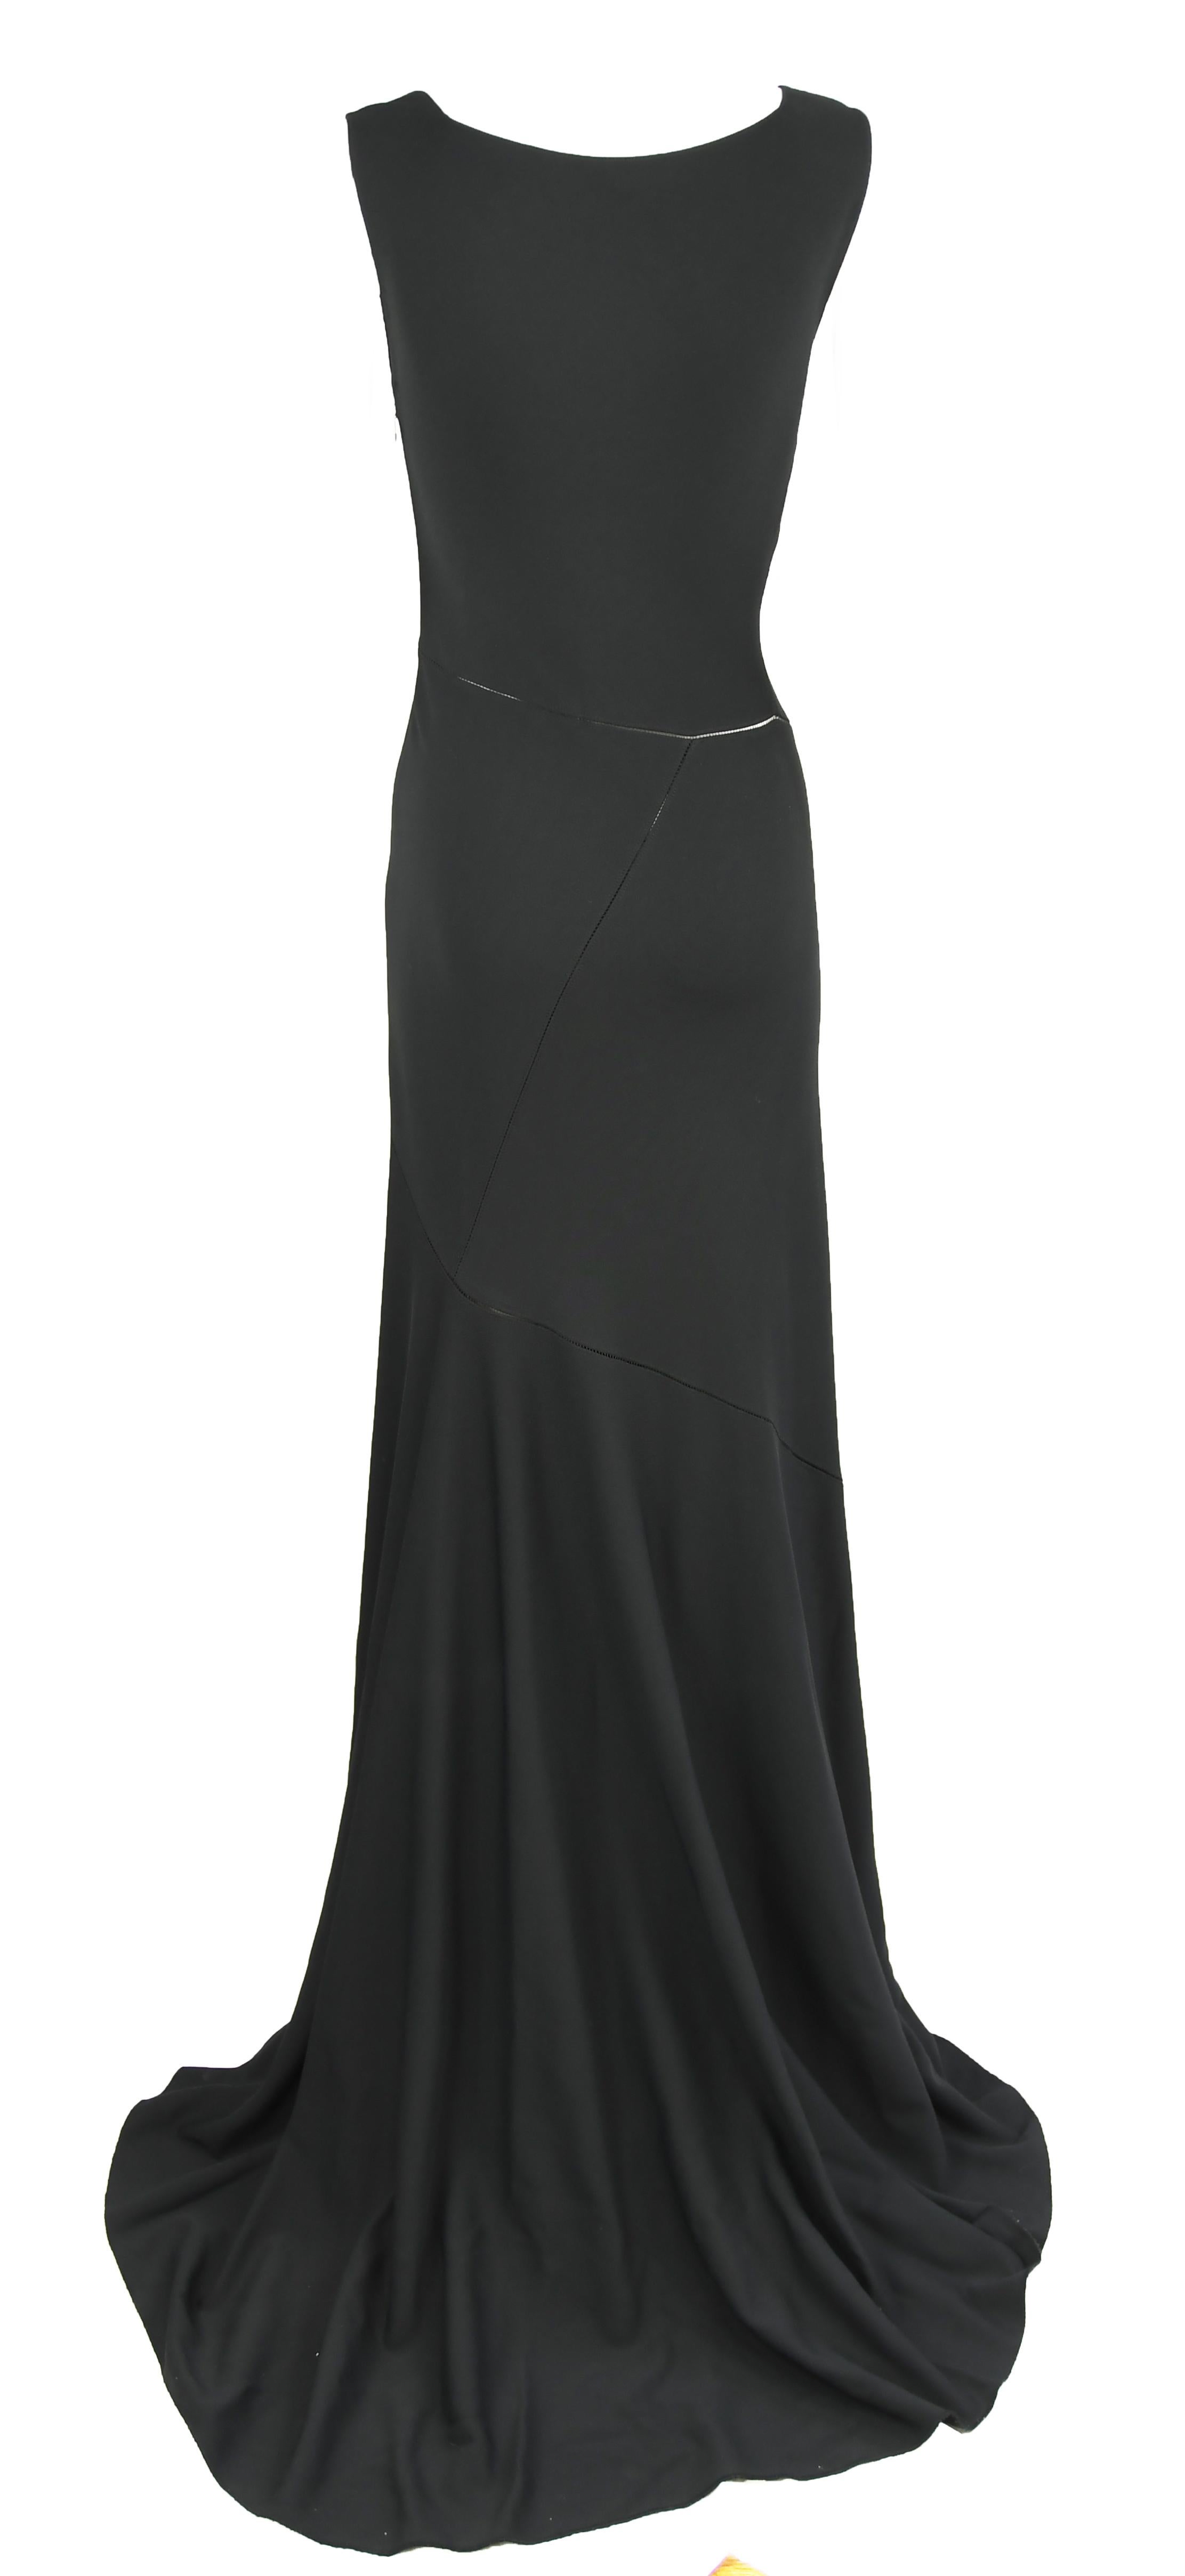 Original Azzedine Alaia jet black sleeveless gown, featuring a square neckline and train. Classic, gorgeous and elegant.  Composition is Viscose and Polyester. Marked Size Tag - Medium.